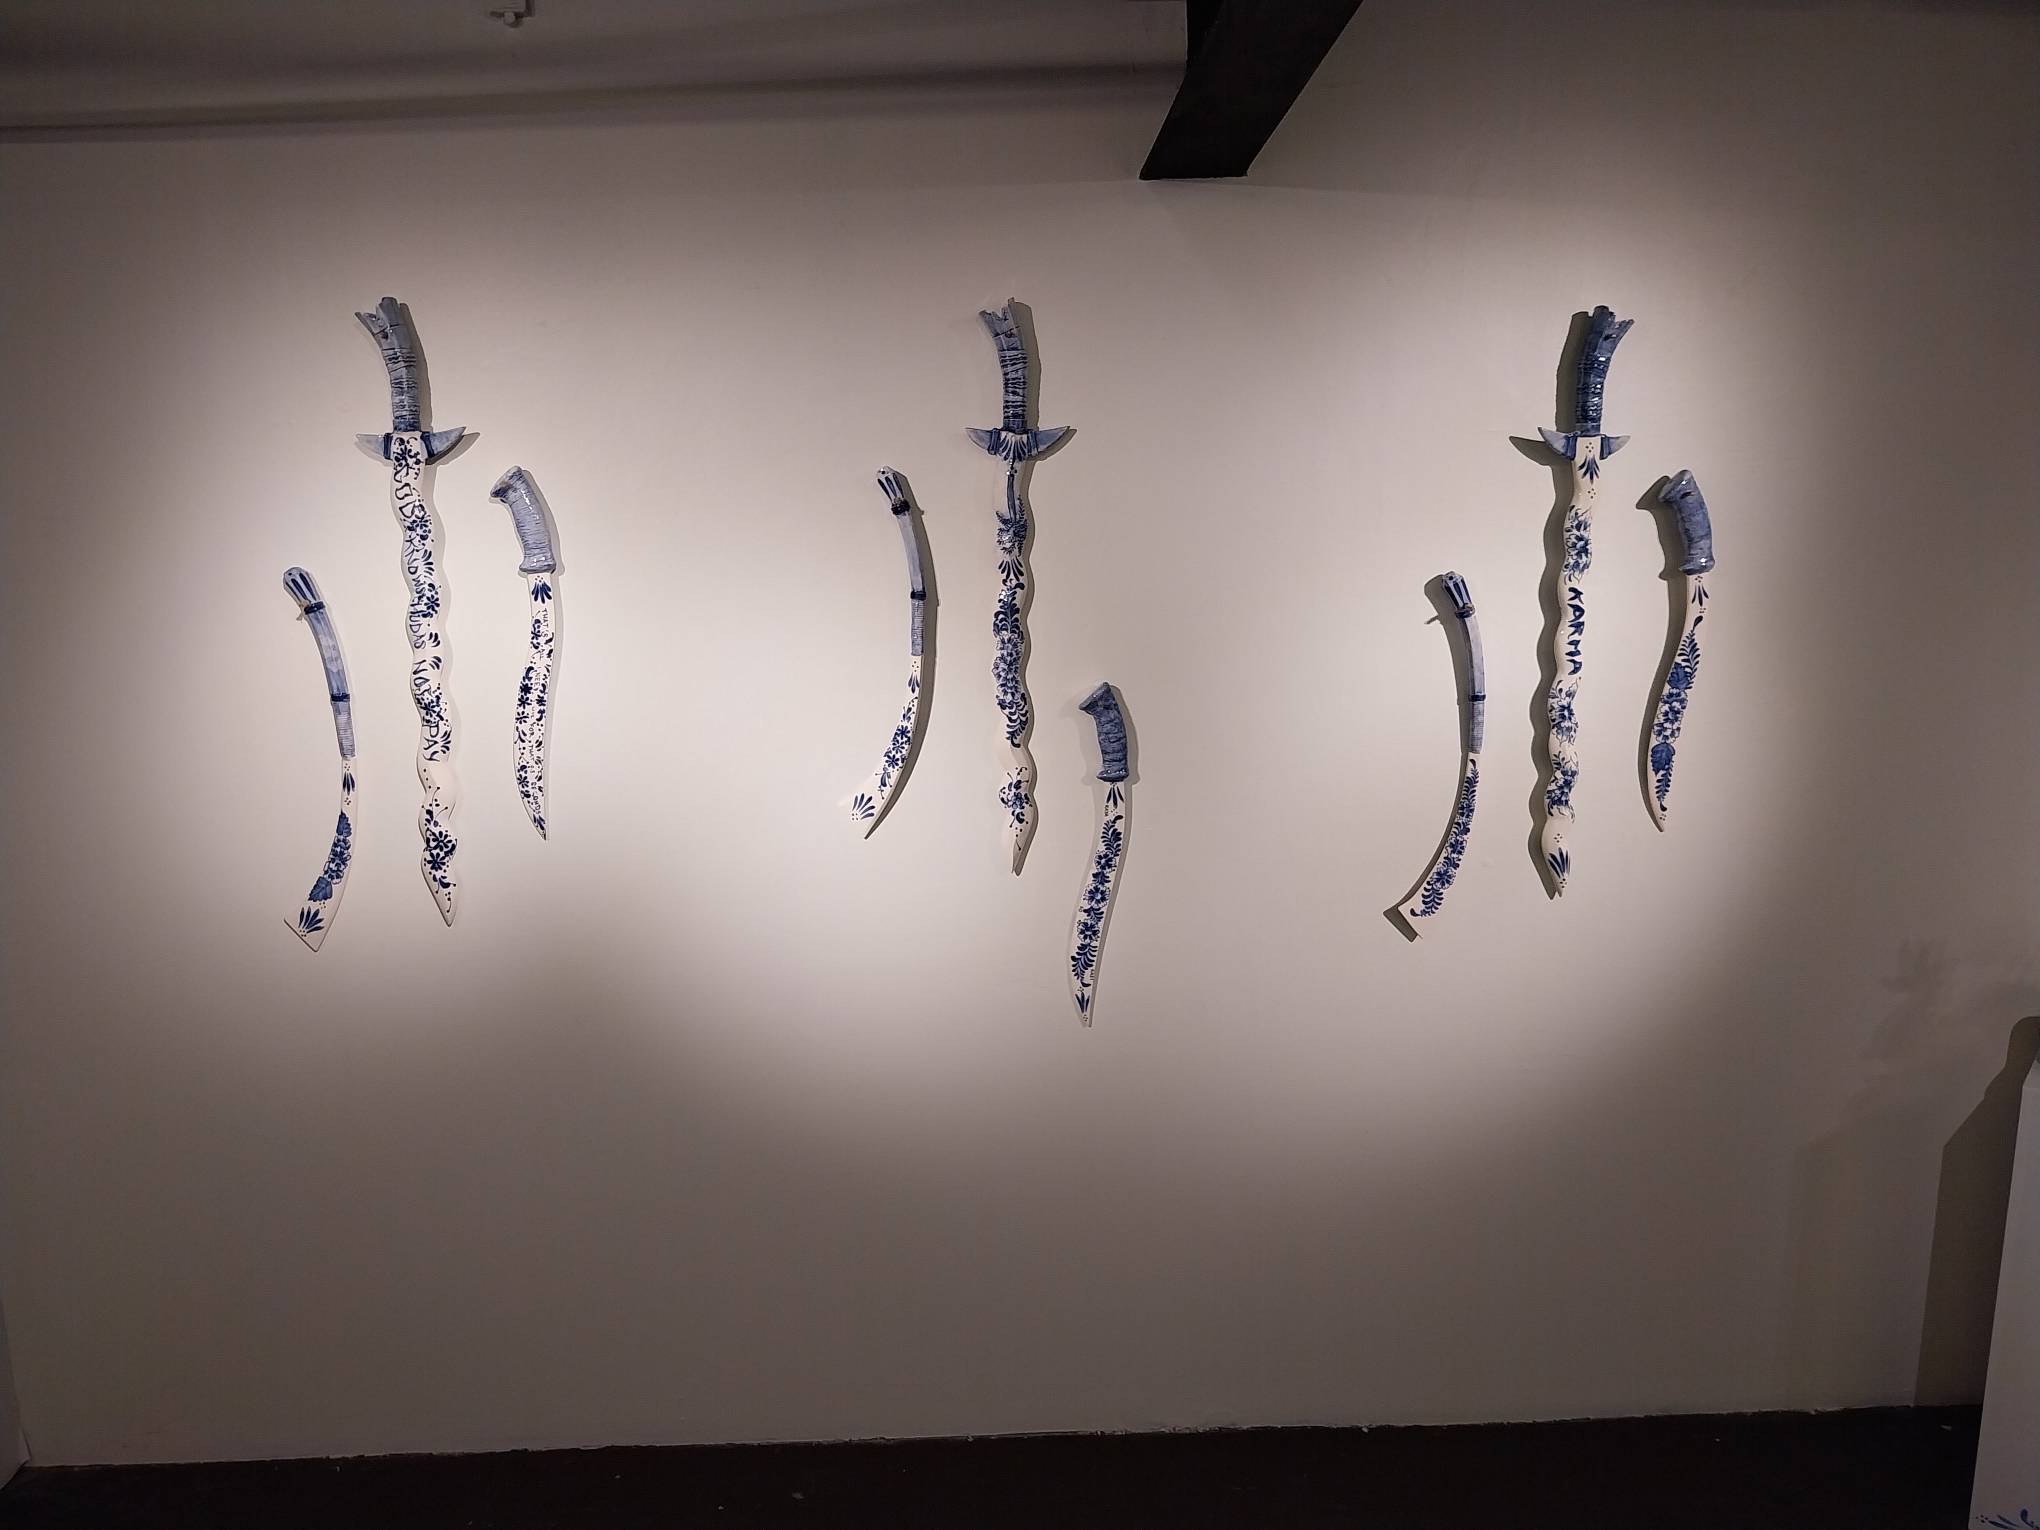 Each pairing of three blades, collectively known as "Sandata," as presented in the exhibit. Photo by Elle Yap.